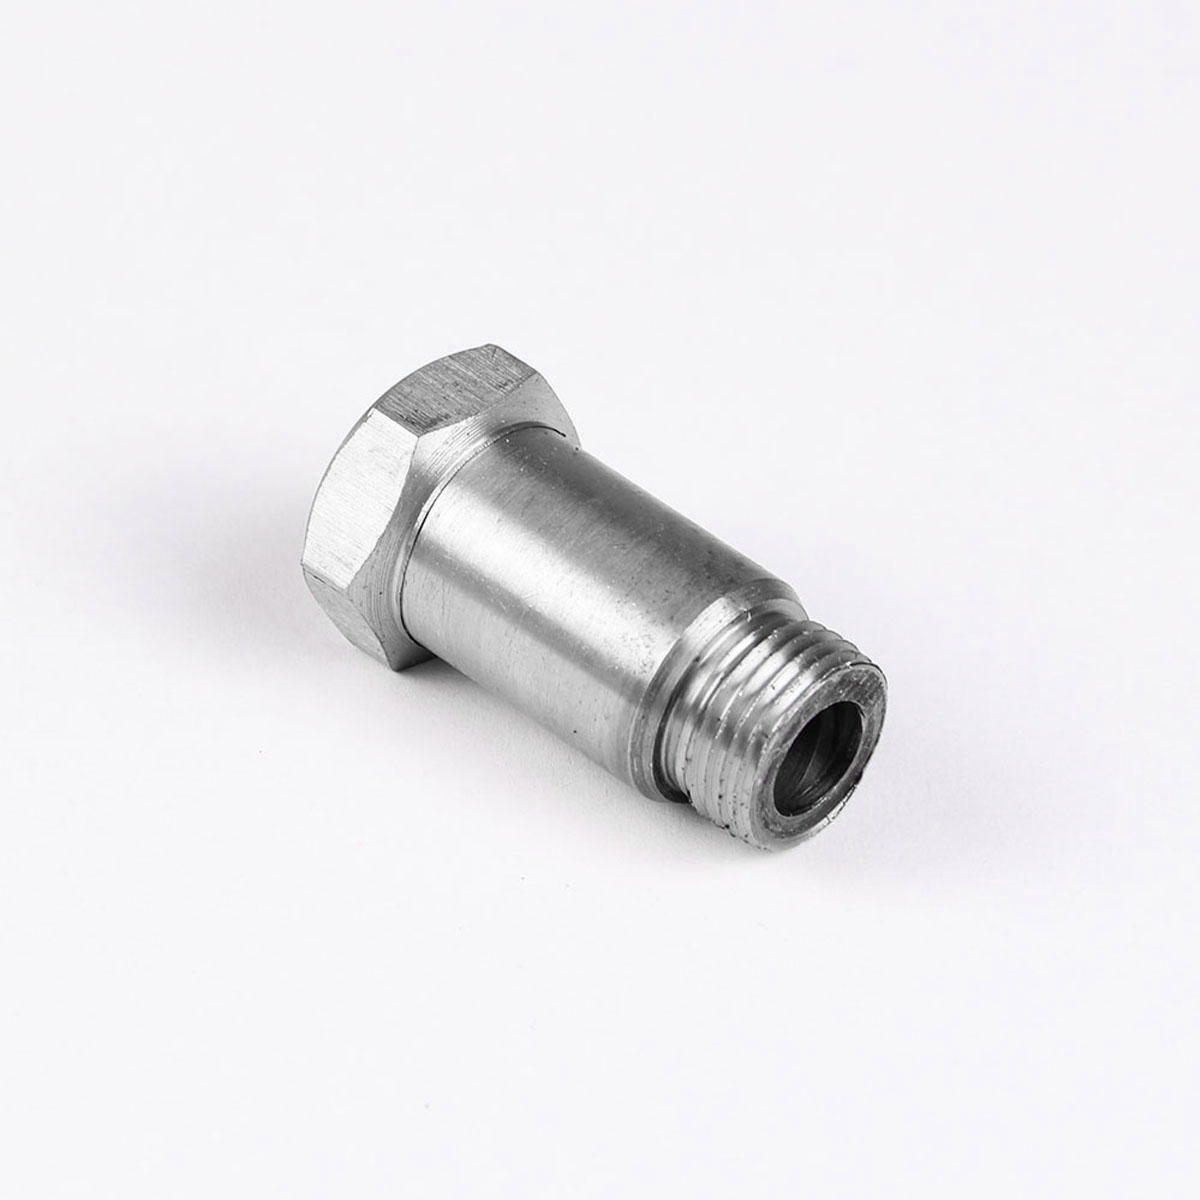 O2-Oxygen-Sensor-Test-Pipe-Extender-Adapter-Extension-Spacer-Bung-Silver-M18x15-1283889